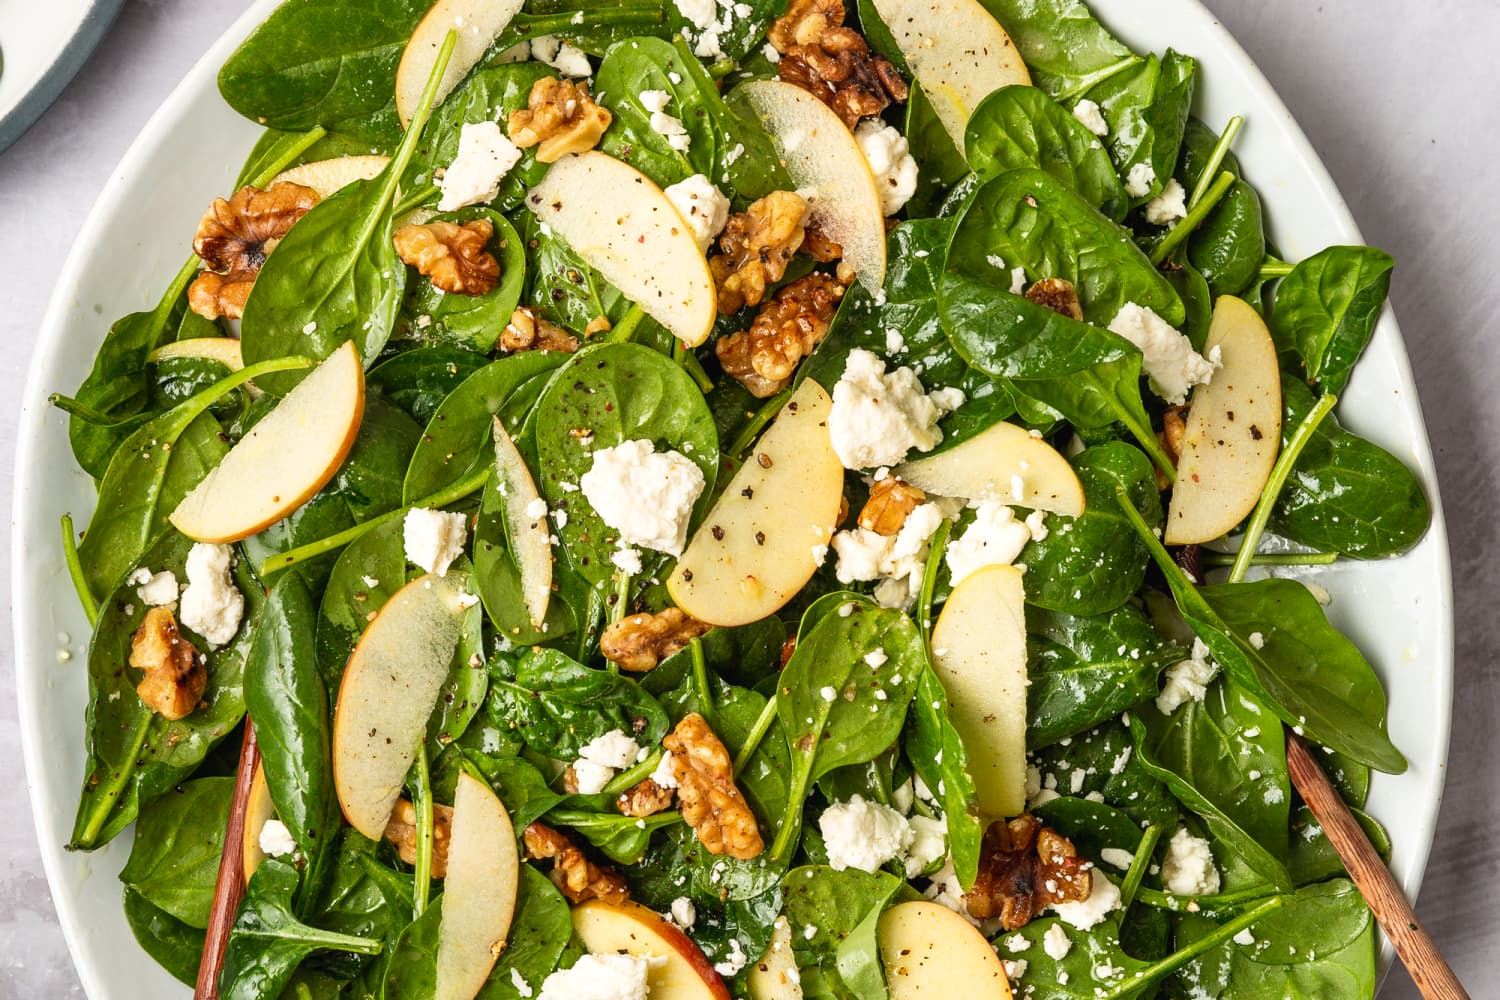 Spinach Salad with Apples, Walnuts, and Feta